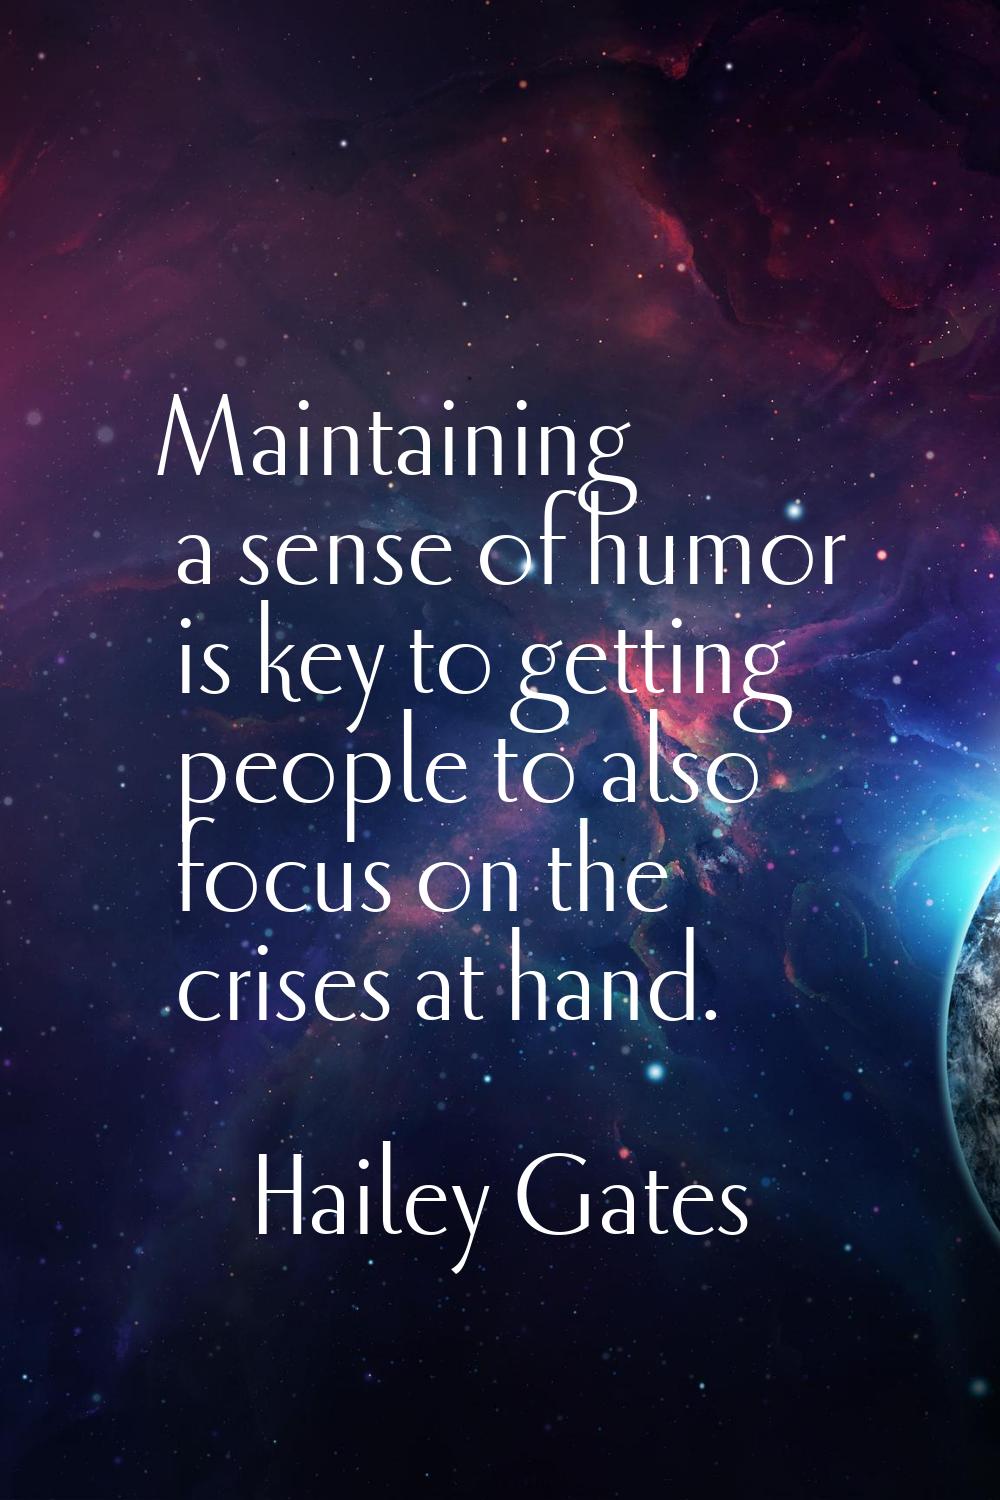 Maintaining a sense of humor is key to getting people to also focus on the crises at hand.